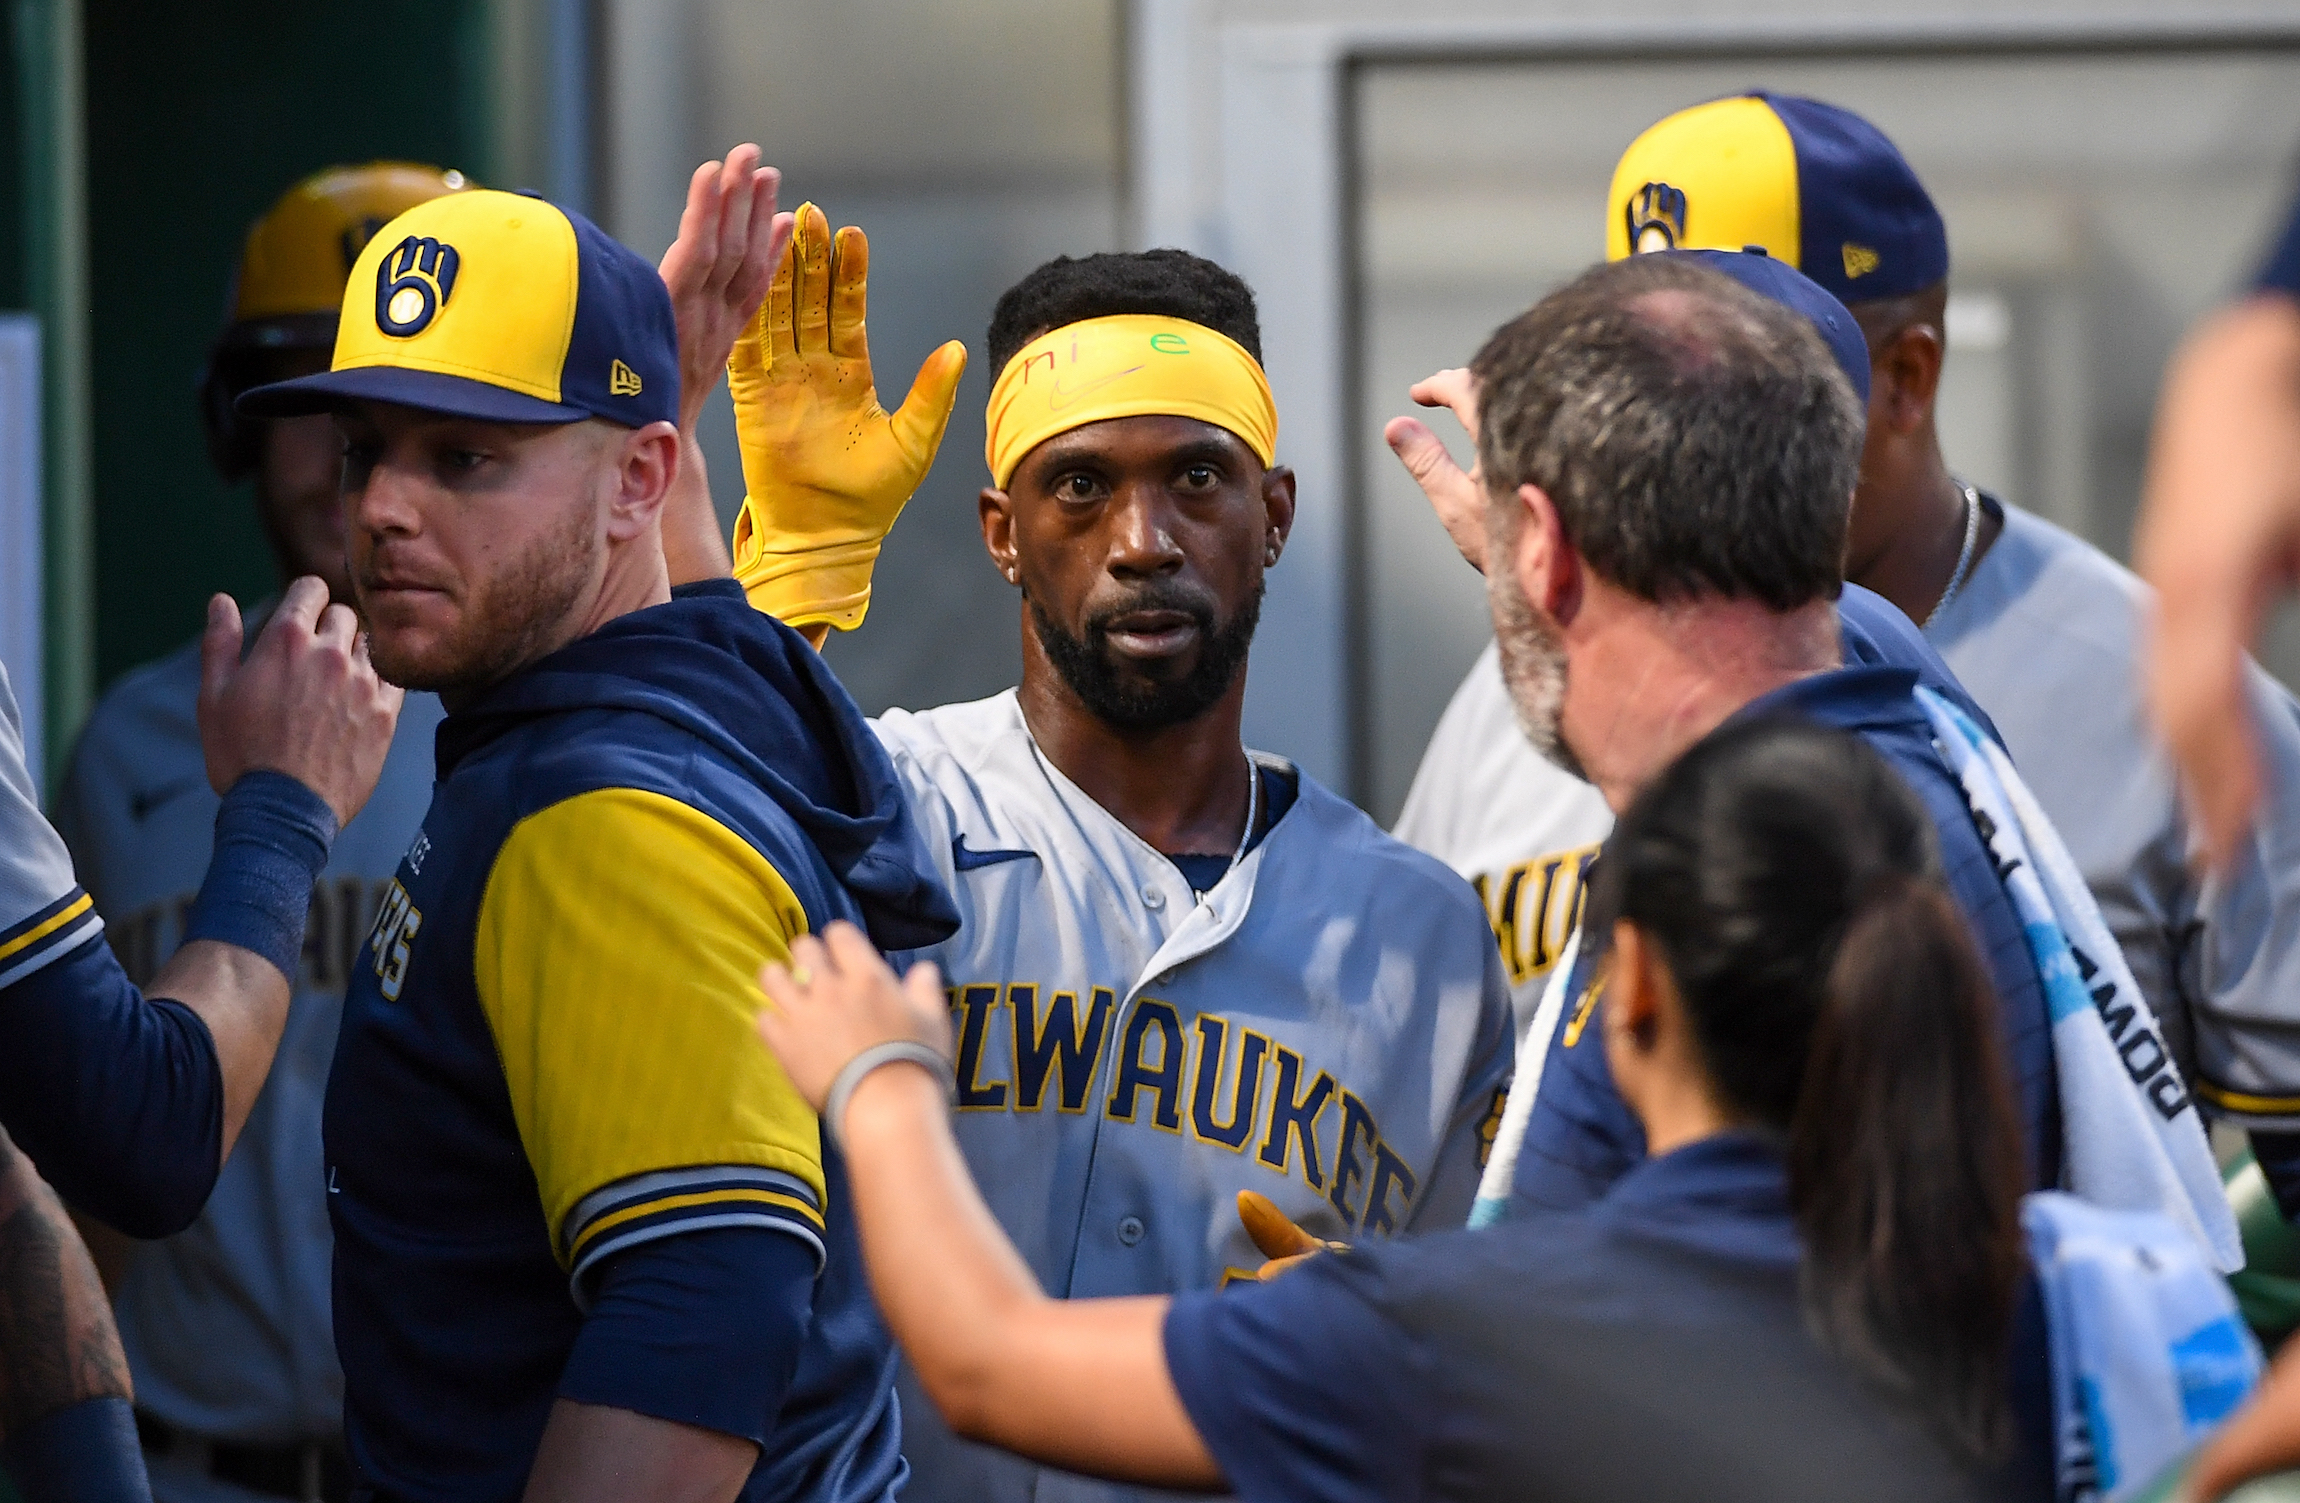 Andrew McCutchen, seen here celebrating with his Brewers teammates after seeing someone in a fursuit.